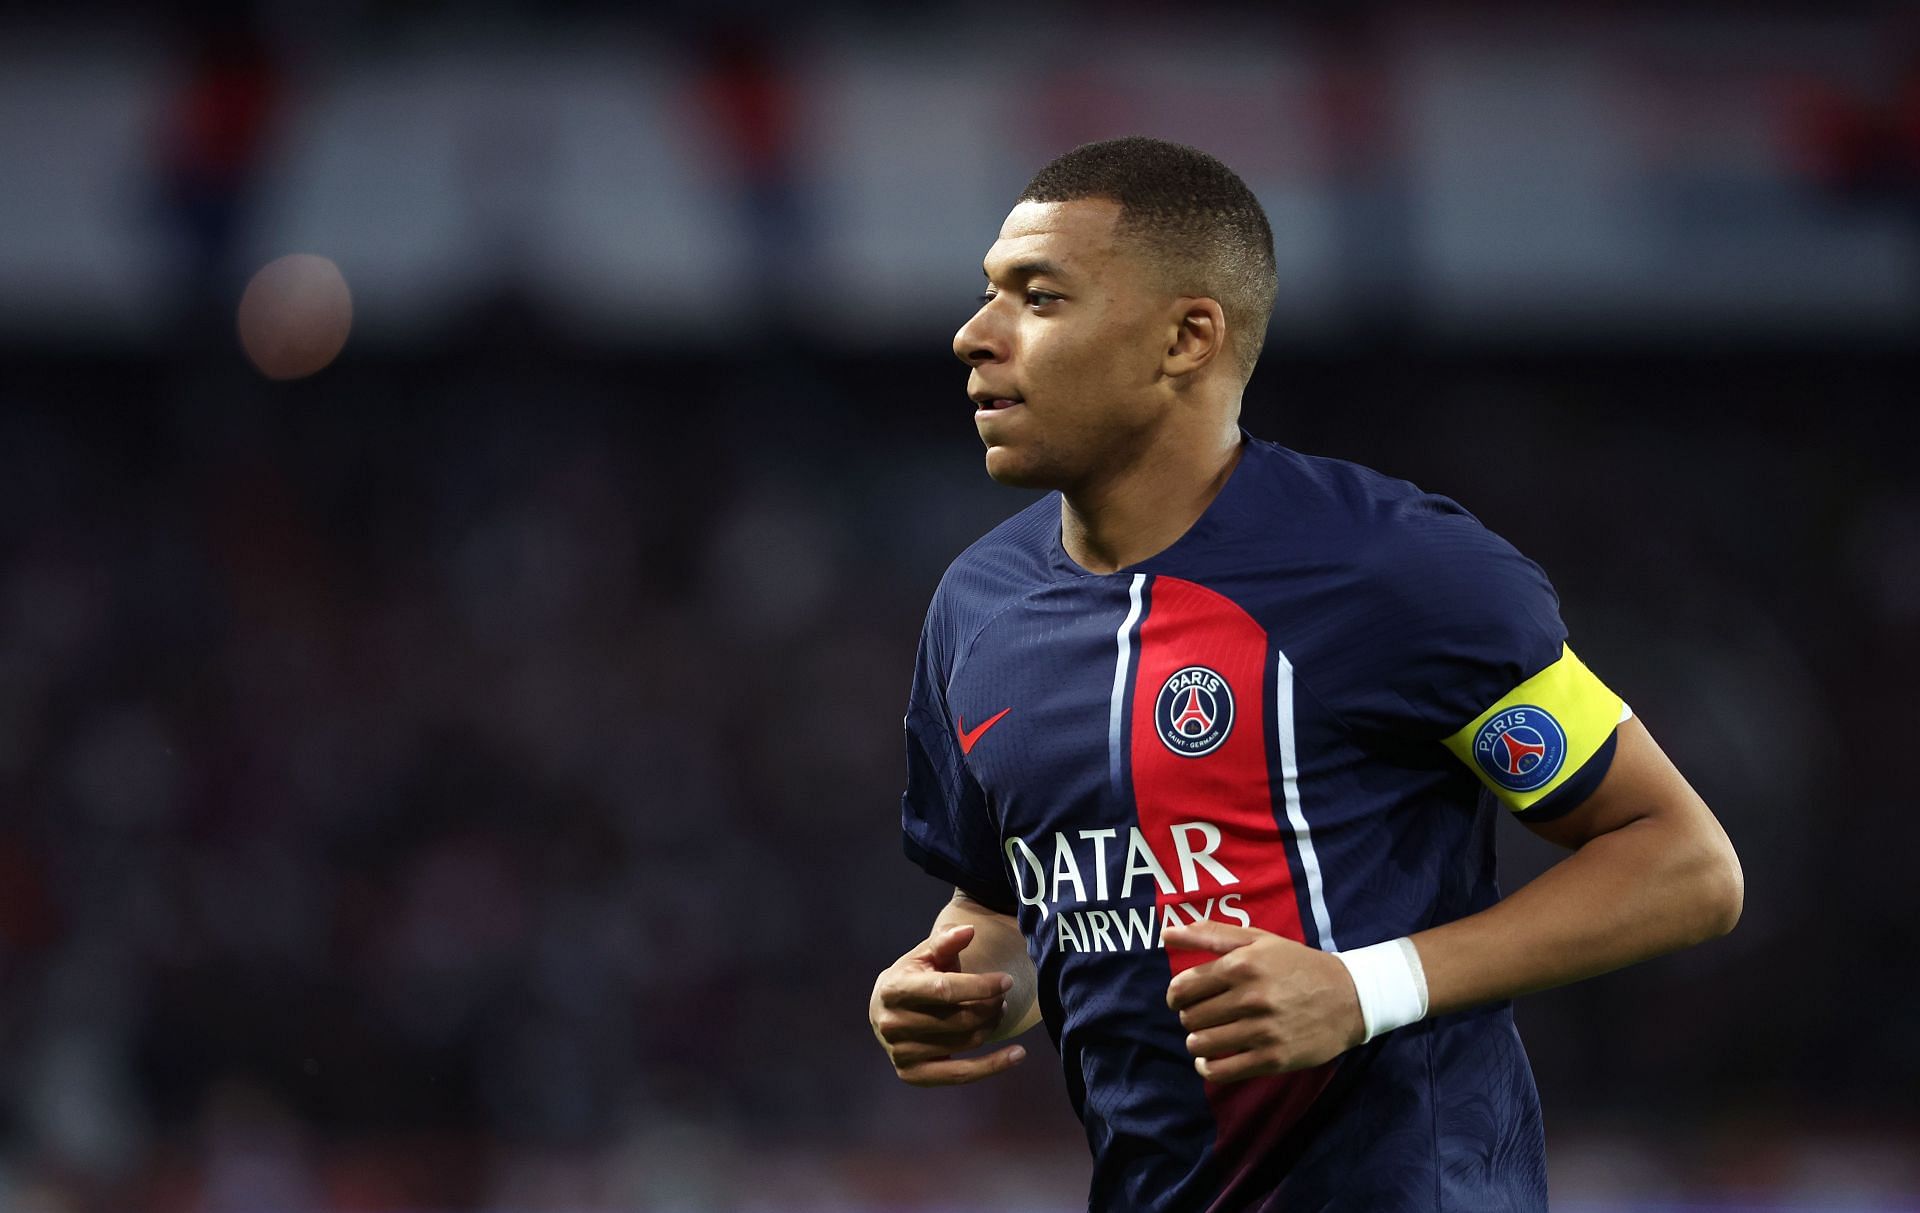 Kylian Mbappe will not arrive at the Emirates this summer.